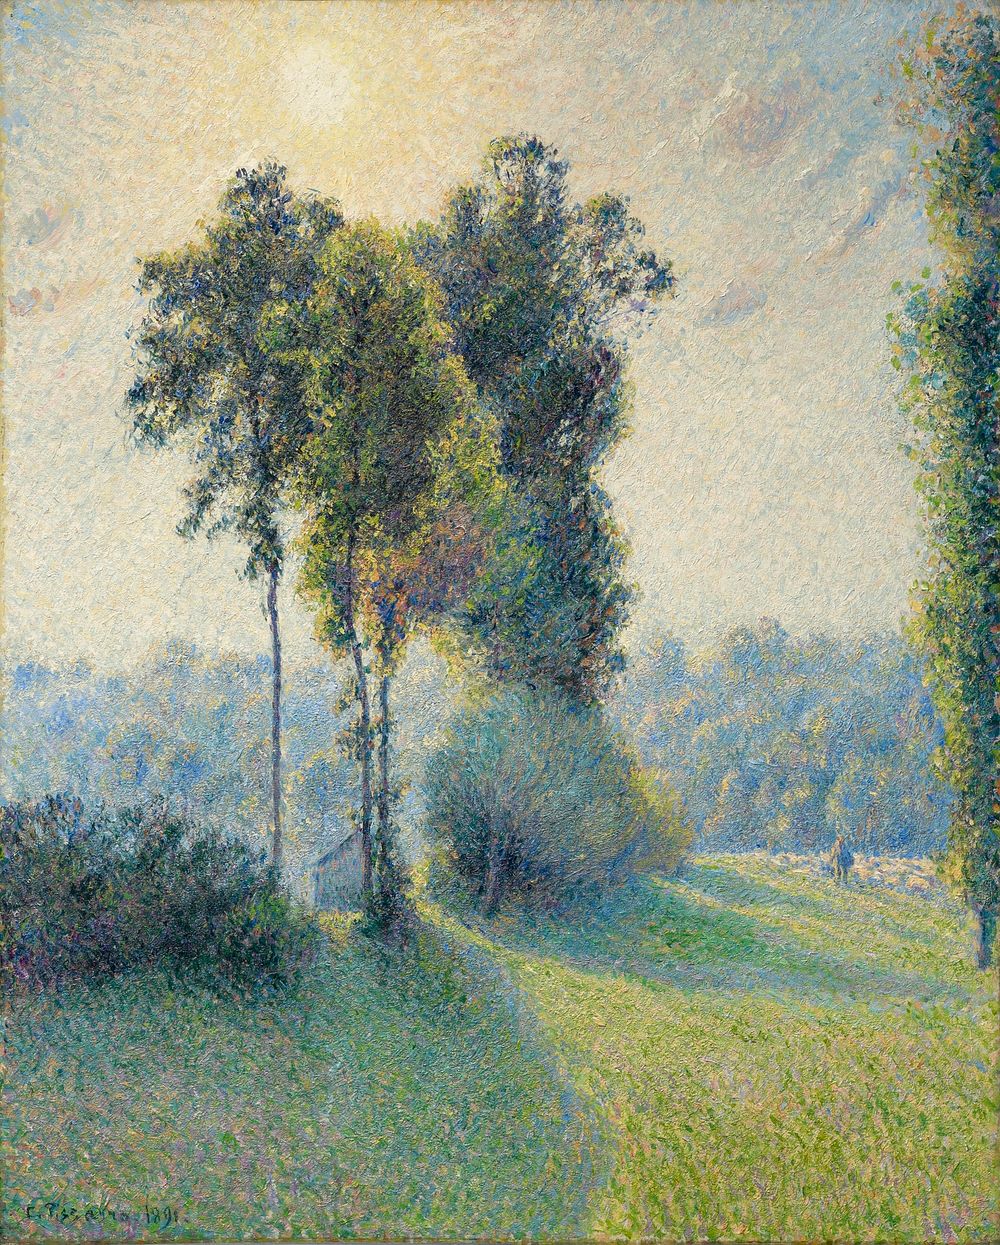 Landscape at Saint-Charles, near Gisors, Sunset (1891) painting in high resolution by Camille Pissarro. Original from the…